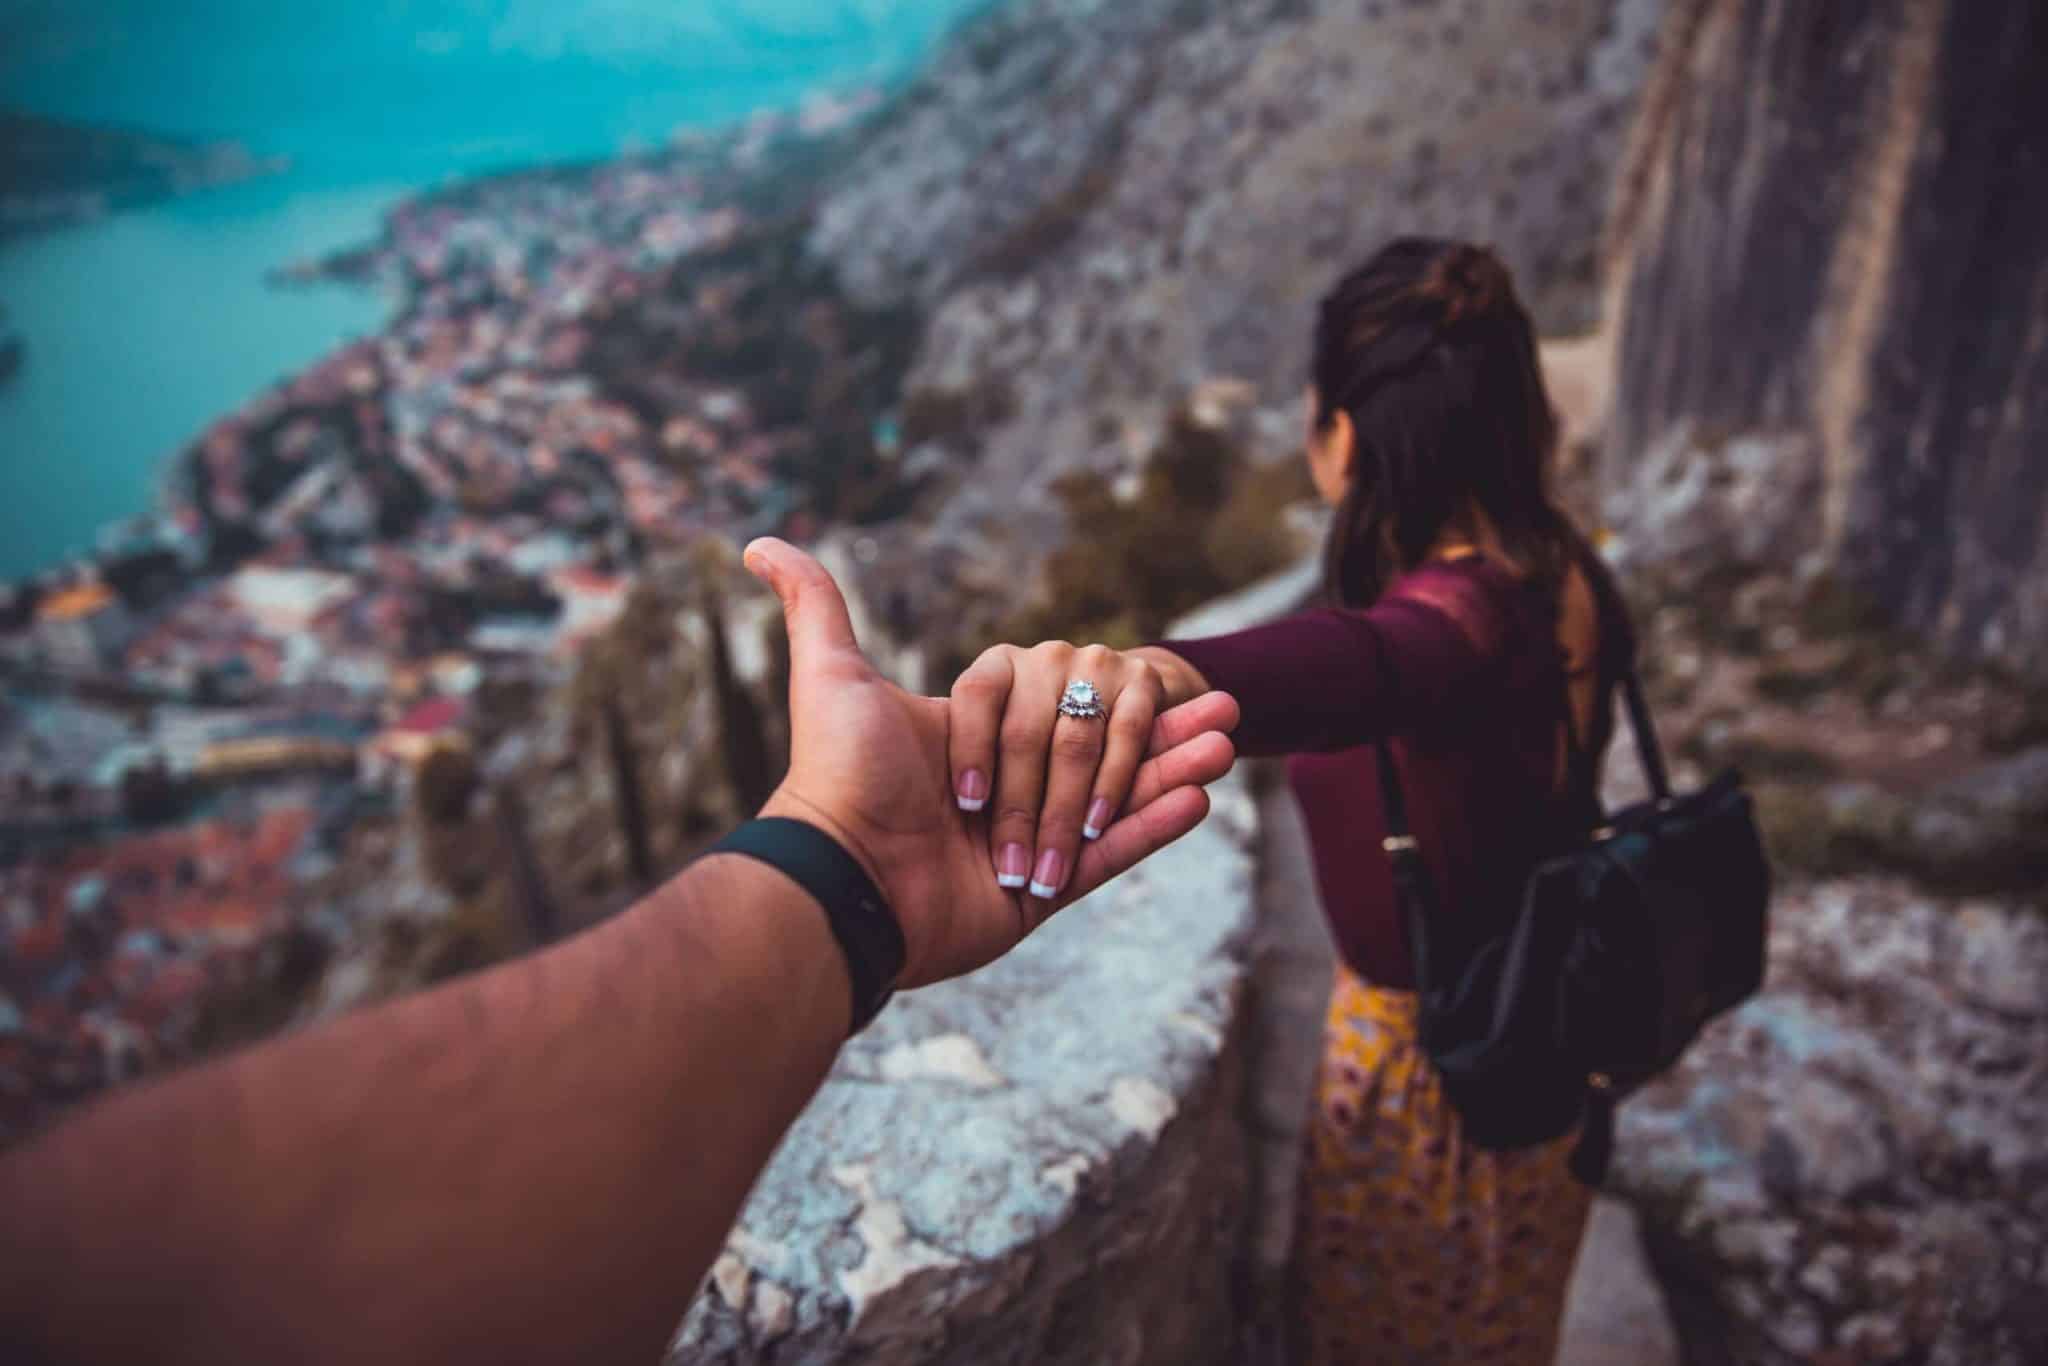 Photo of woman holding out hand in Rio de Janeiro by Christopher Alvarenga for Unsplash